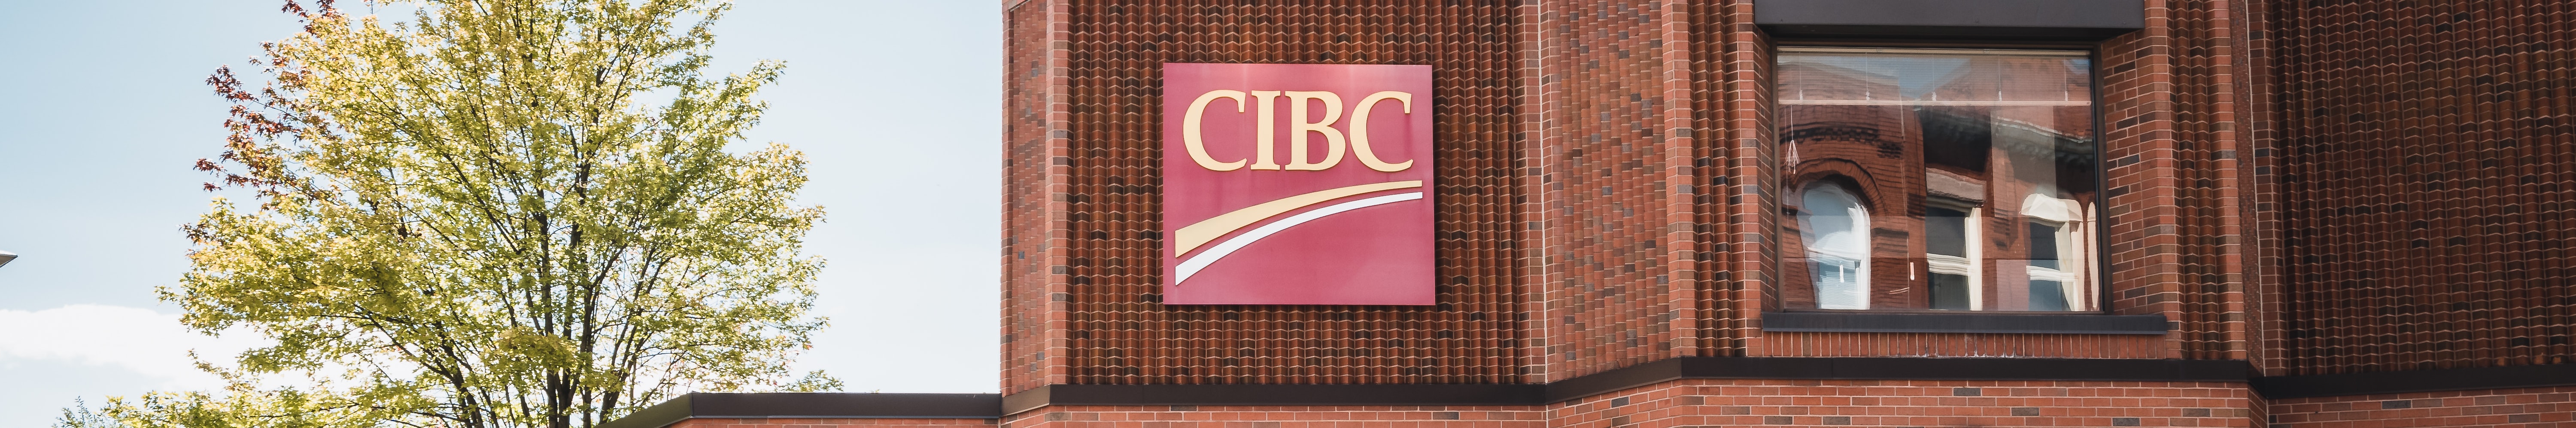 CIBC provided $17.9 Bn to fossil fuel companies and $26.9 Bn in sustainable finance in 2022